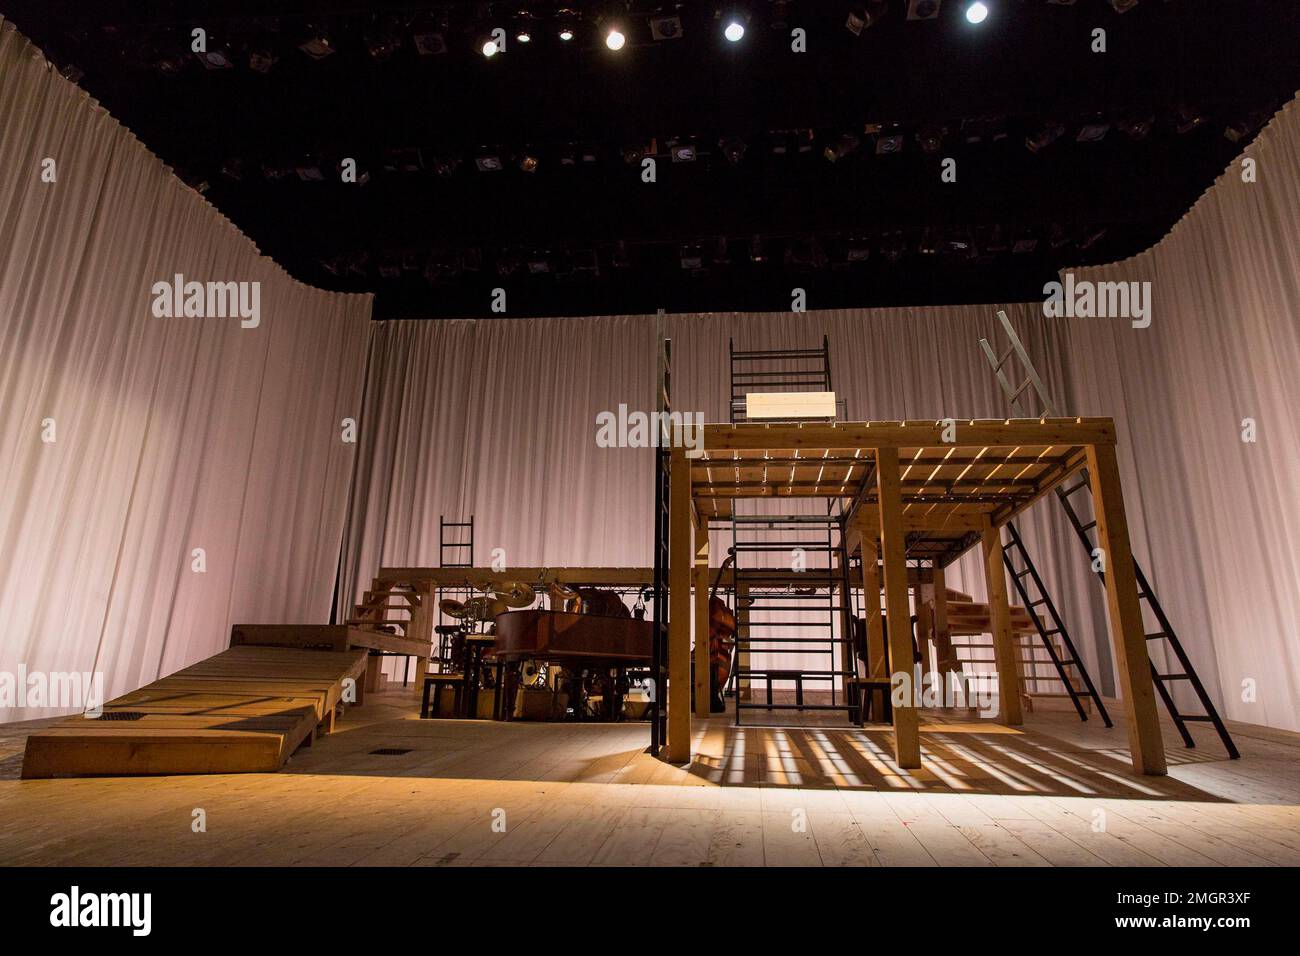 stage,set,empty,wood,wooden,platform,ladder,musical,instruments,curtain,ramp for JANE EYRE at the Lyttelton Theatre, National Theatre (NT), London SE1  17/09/2015  a co-production with the Bristol Old Vic  based on the novel by Charlotte Bronte   devised by the company   dramaturg: Mike Akers   composer & musical director: Benji Bower   set design: Michael Vale   costumes: Katie Sykes   lighting: Aideen Malone   movement: Dan Canham   director: Sally Cookson Stock Photo